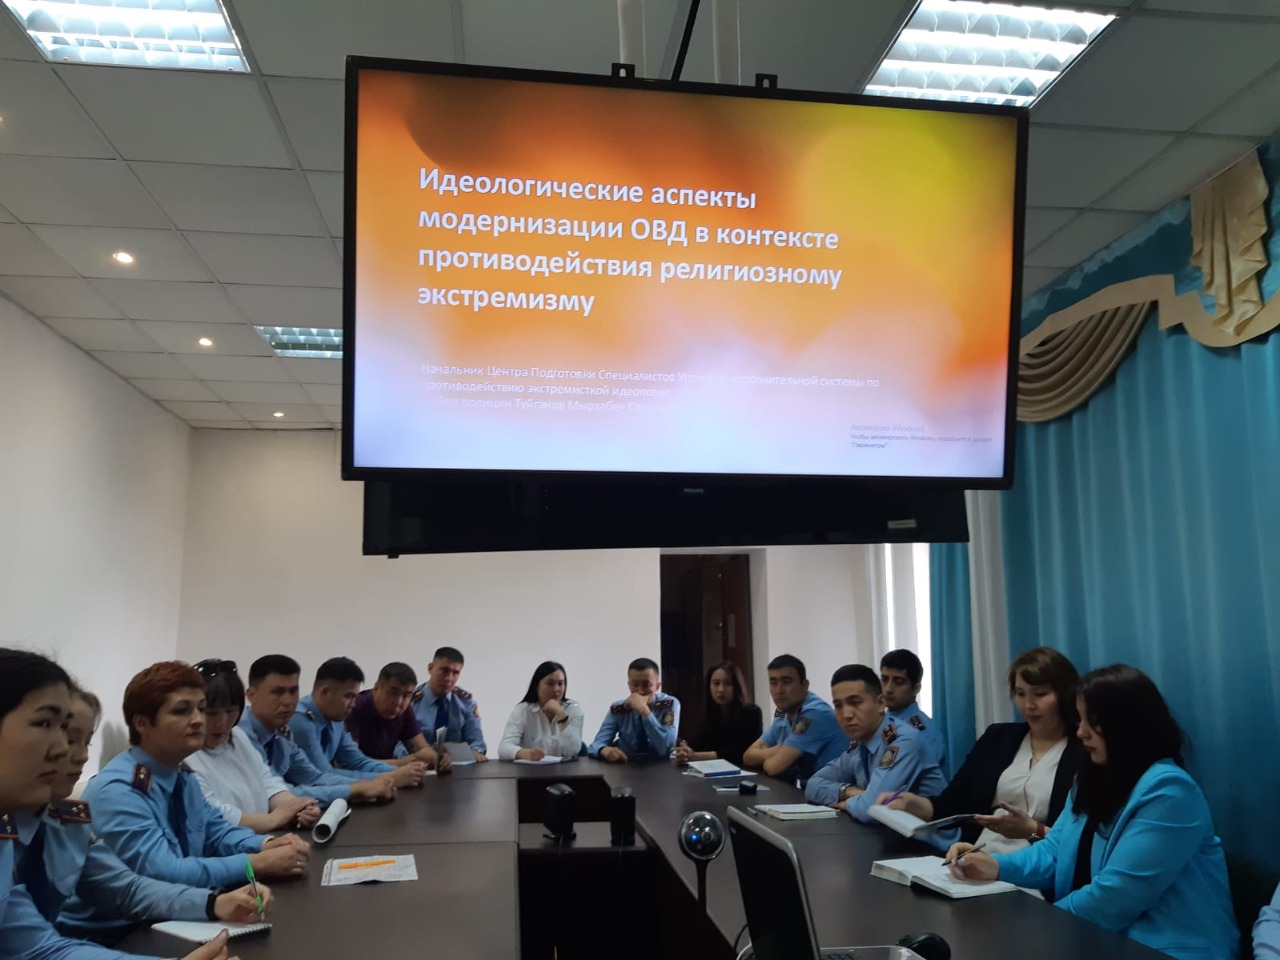 Training Seminar for employees of theological services penitentiary system of the region